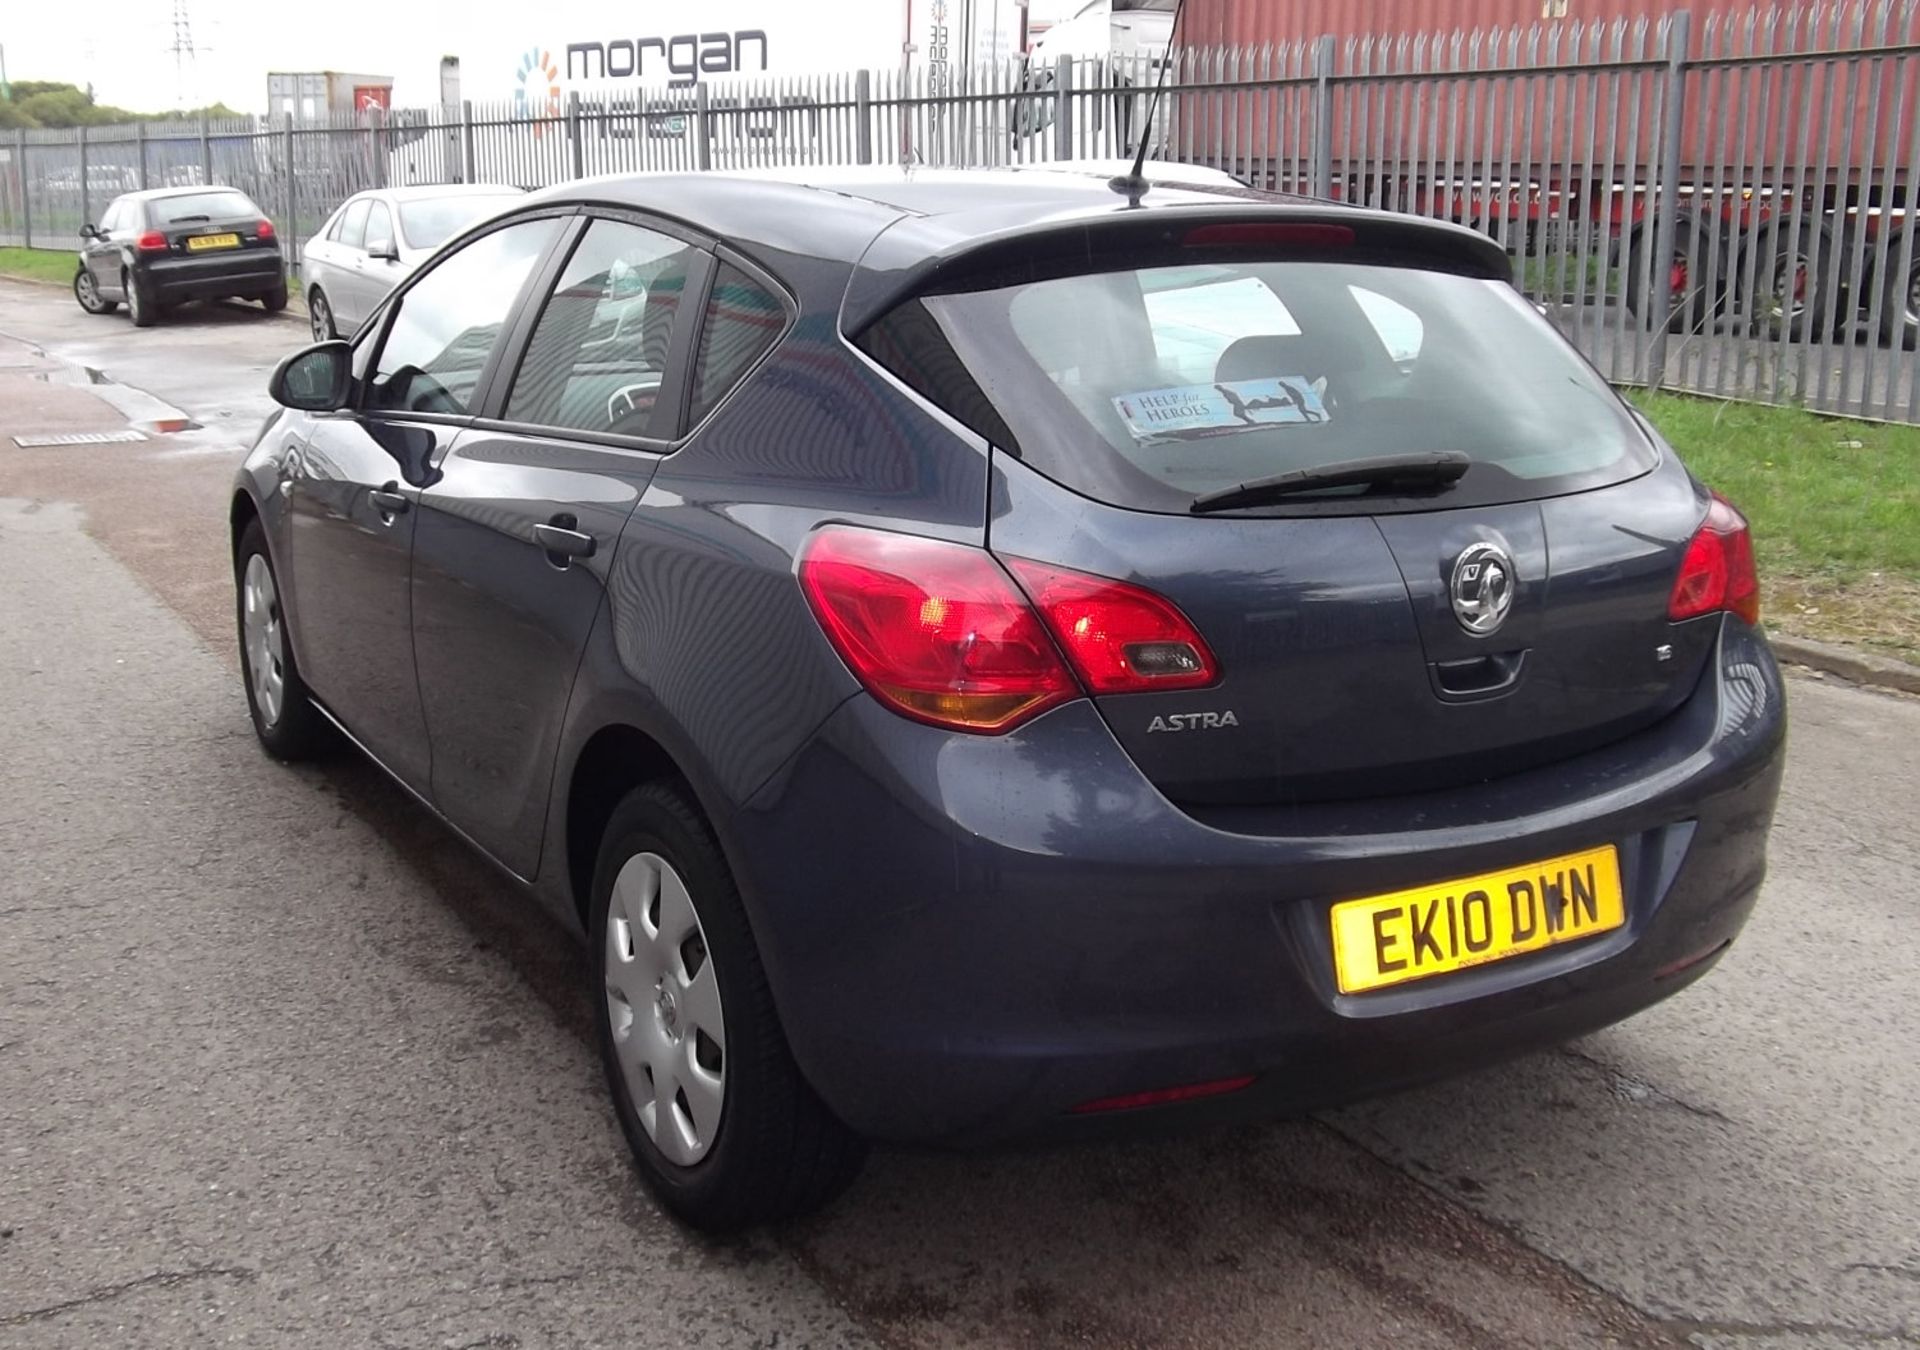 2010 Vauxhall Astra 1.6 Exclusive 5 Door Hatchback - CL505 - NO VAT ON THE HAMMER - Location: Corby, - Image 4 of 9